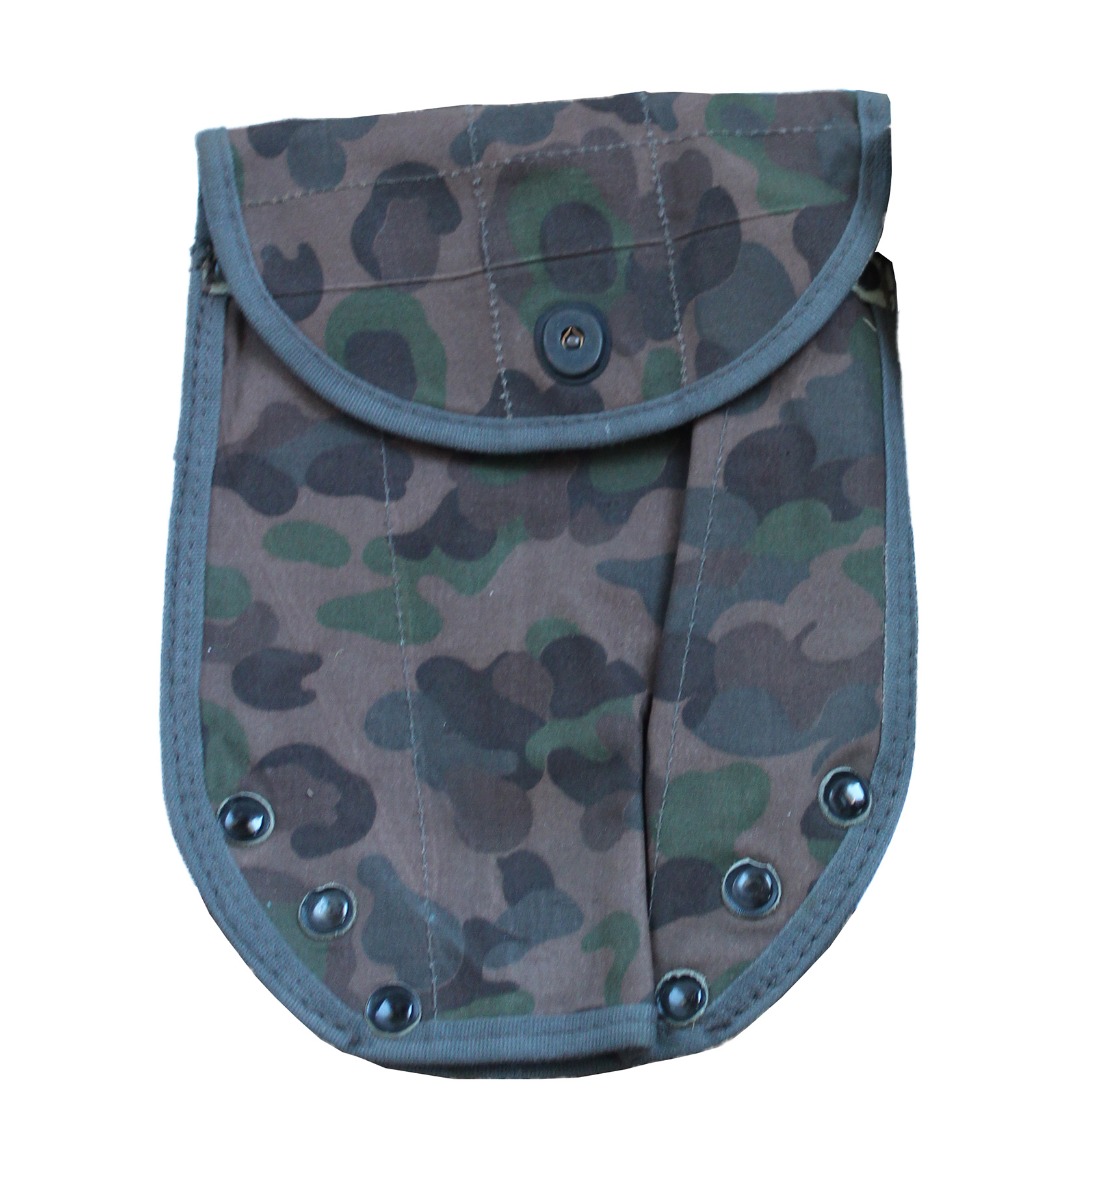 AUSTRIAN ARMY SHOVEL "PEA PATTERN" CAMOUFLAGE COVER 